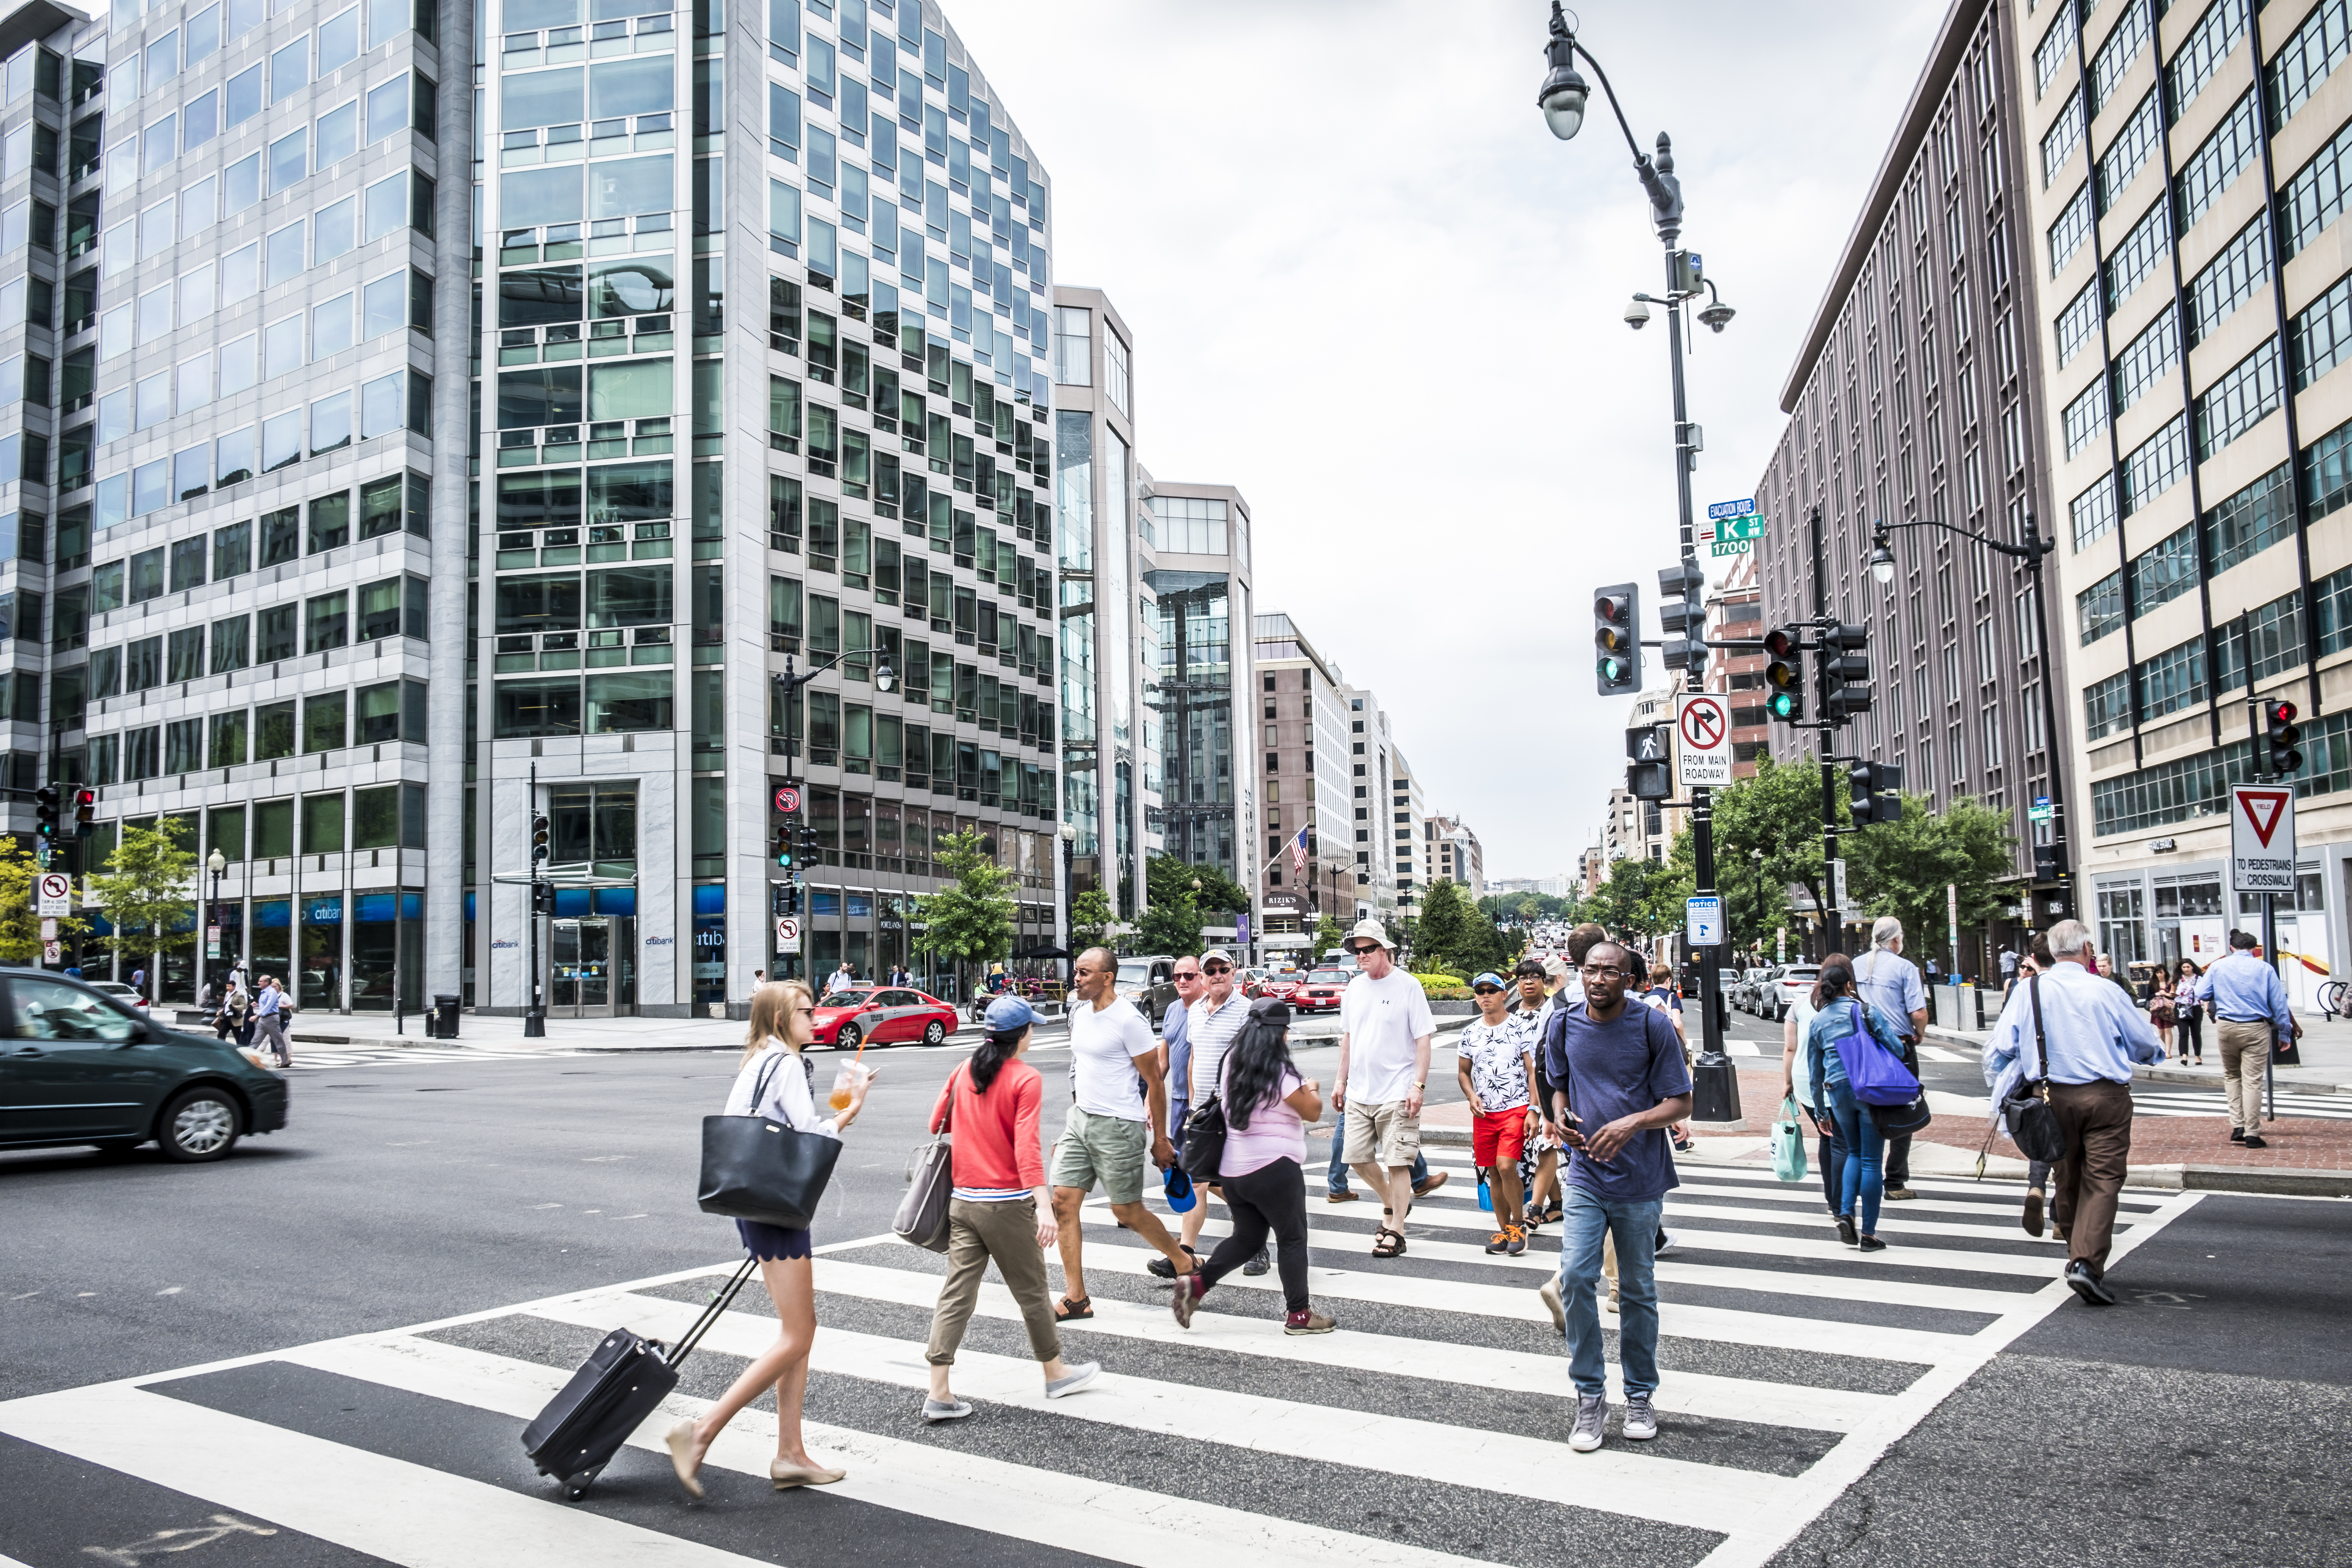 Crowd of people crossing the street in Washington, D.C.